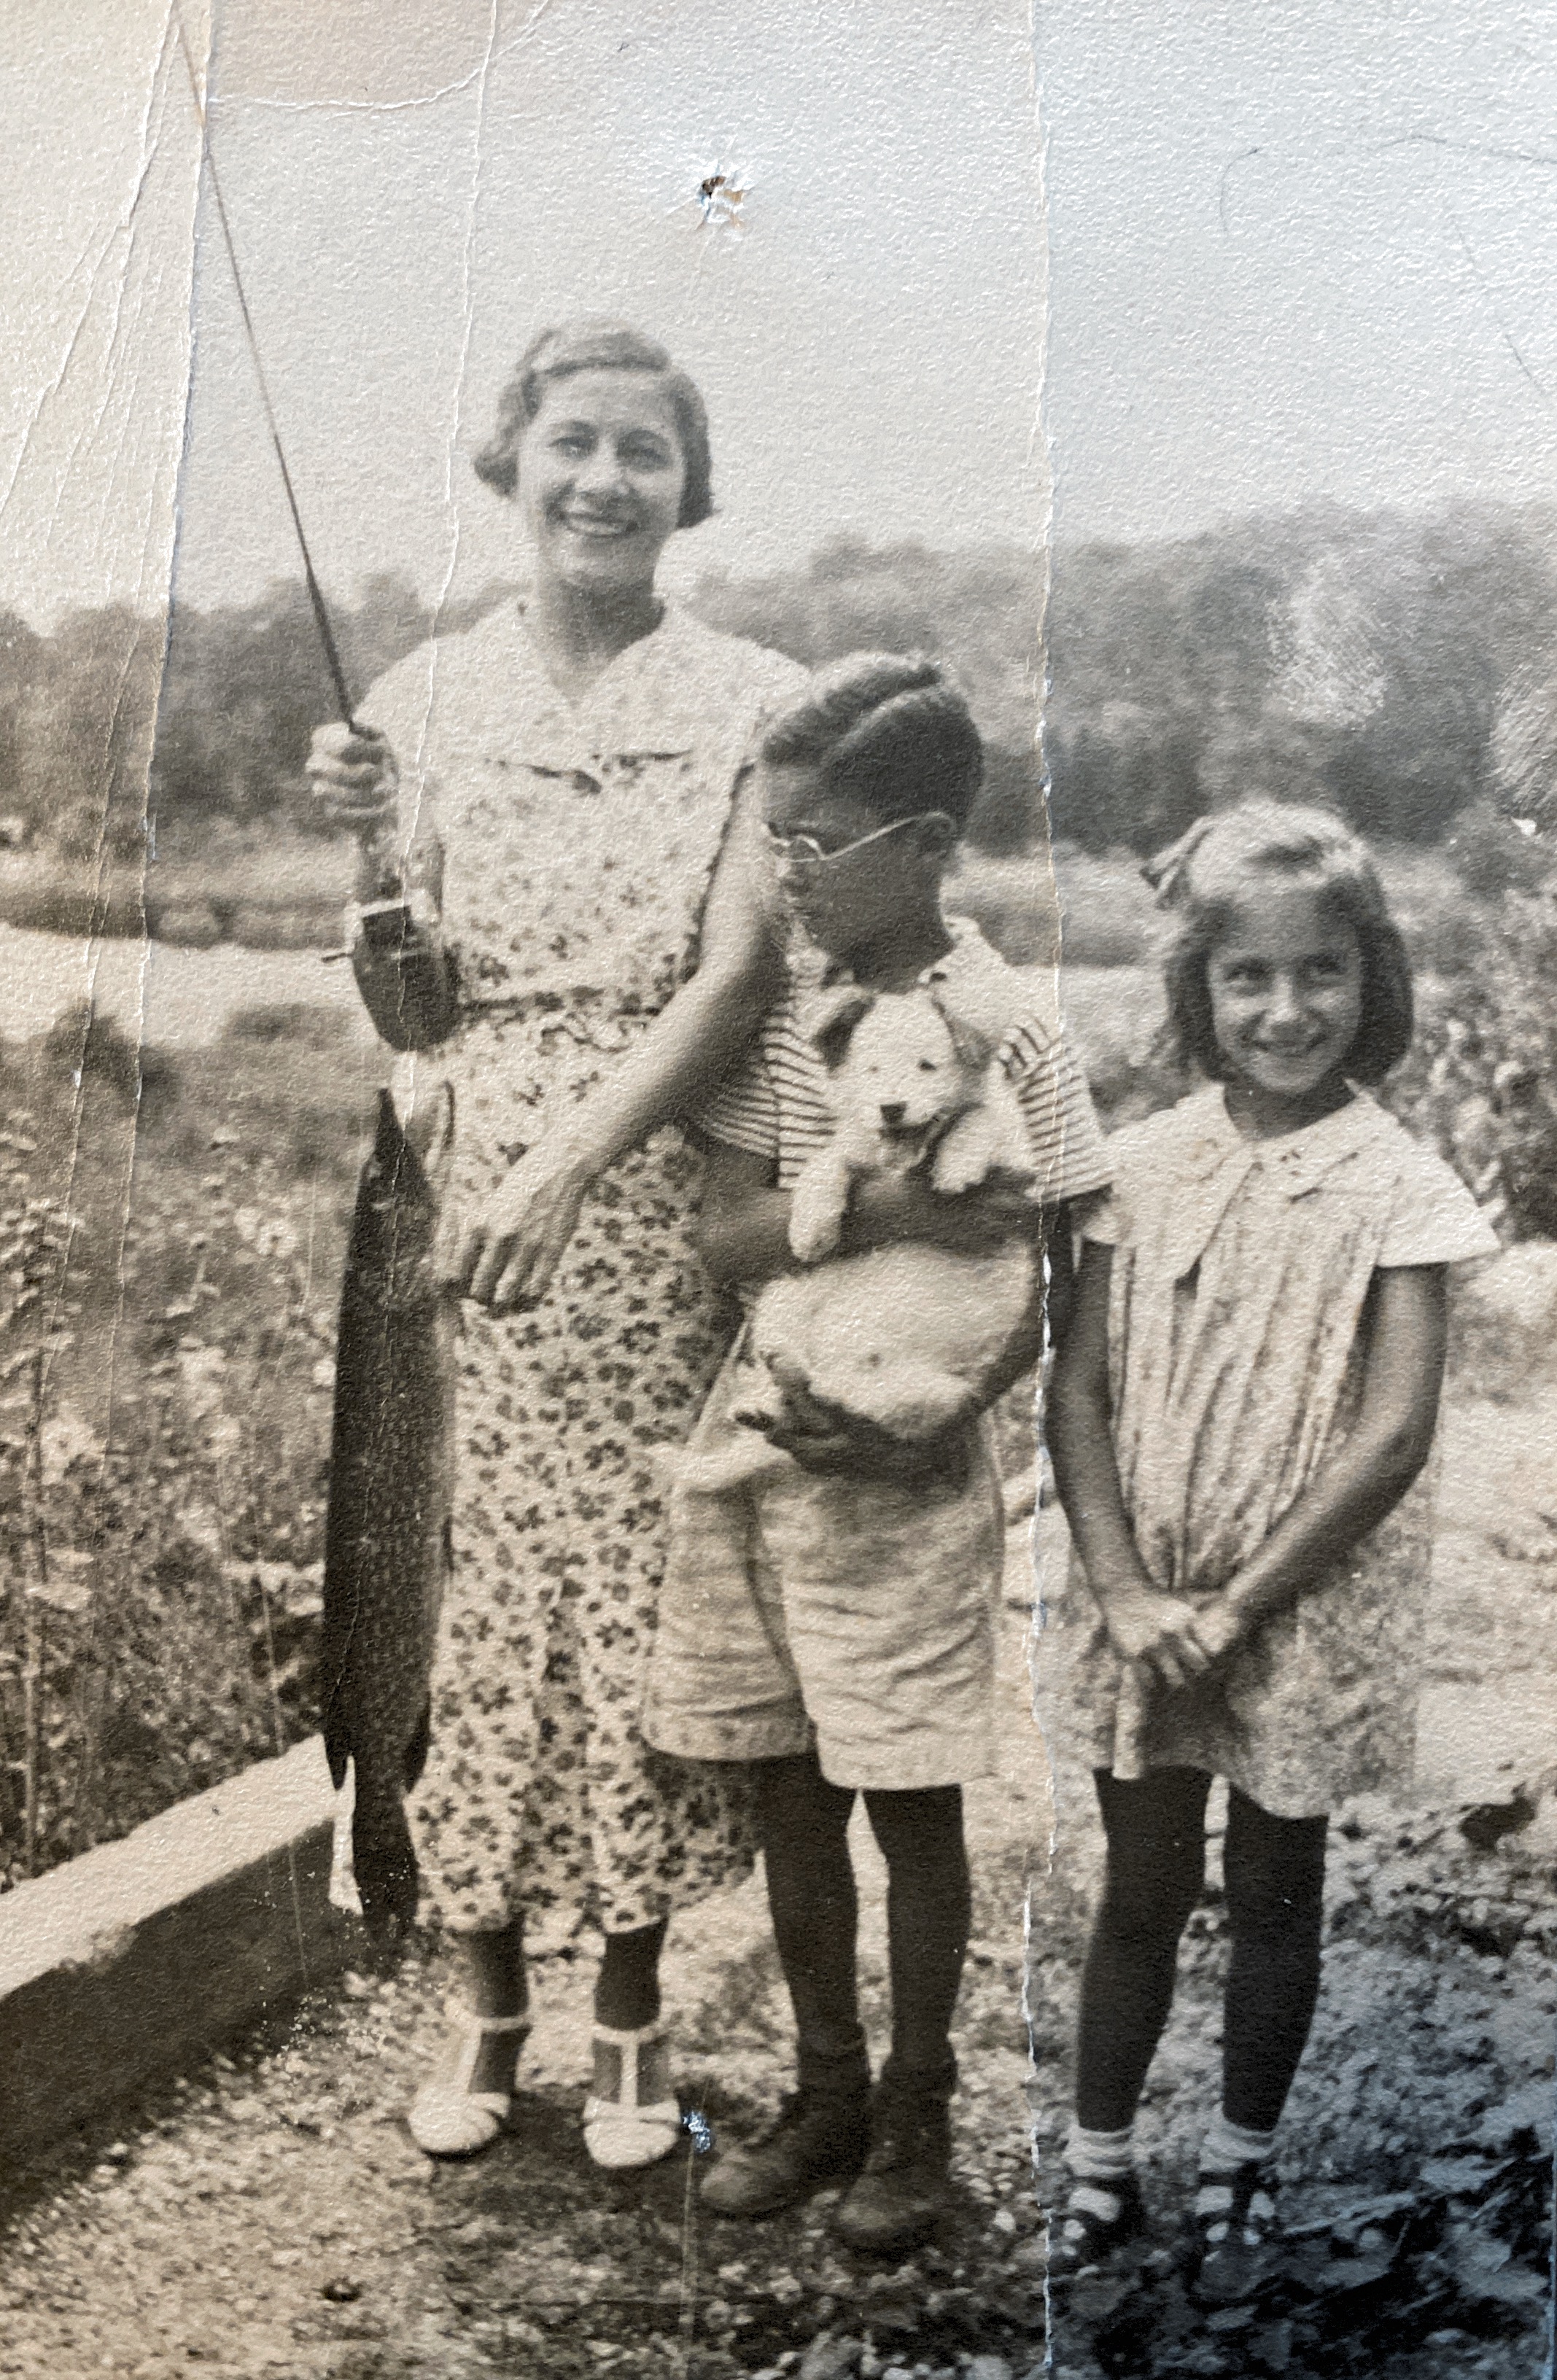 My Grandmother, Father and Aunt fishing along with their puppy - circa 1935, Ramsey, NJ